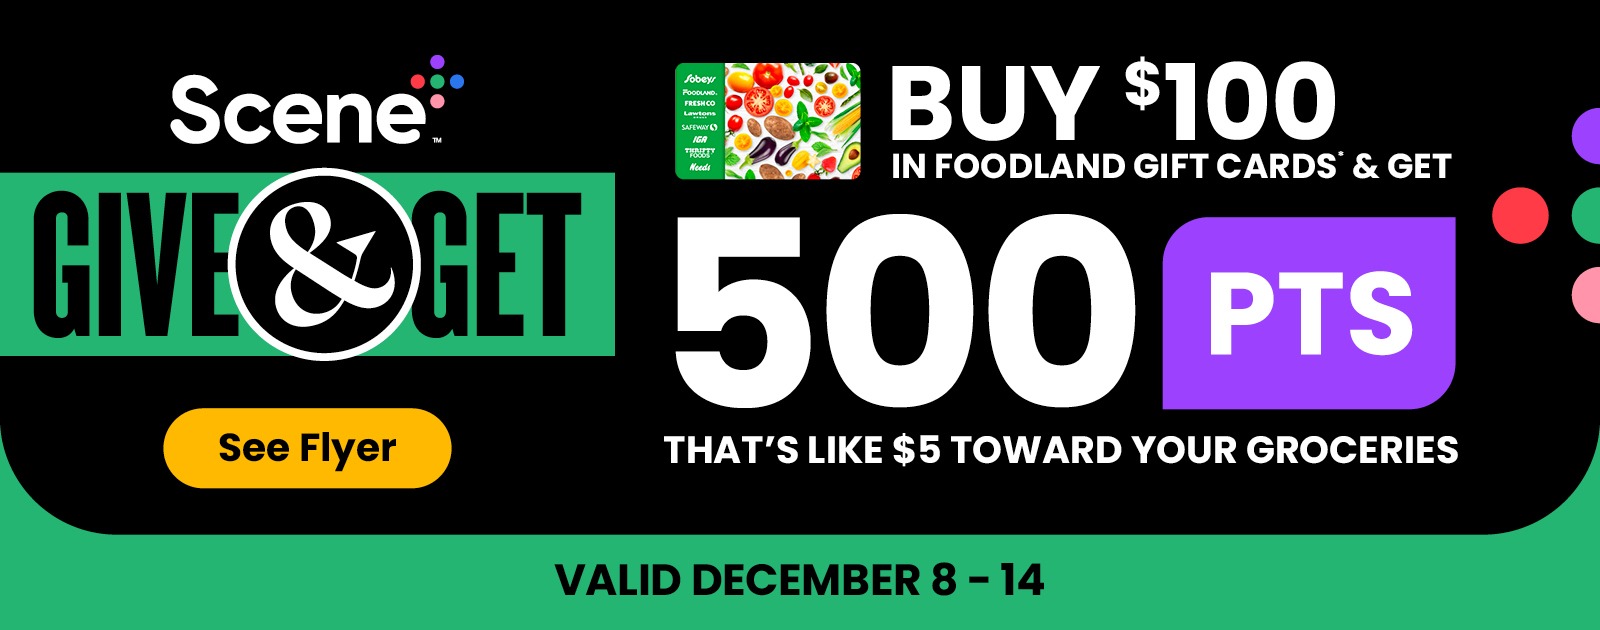 Text Reading 'Scene Plus Give & Get. Buy $100 in Foodland Gift Cards & get 500 points. That's like $5 toward your groceries. Valid from December 8 to December 14. 'See flyer' by clicking the button on left below.'